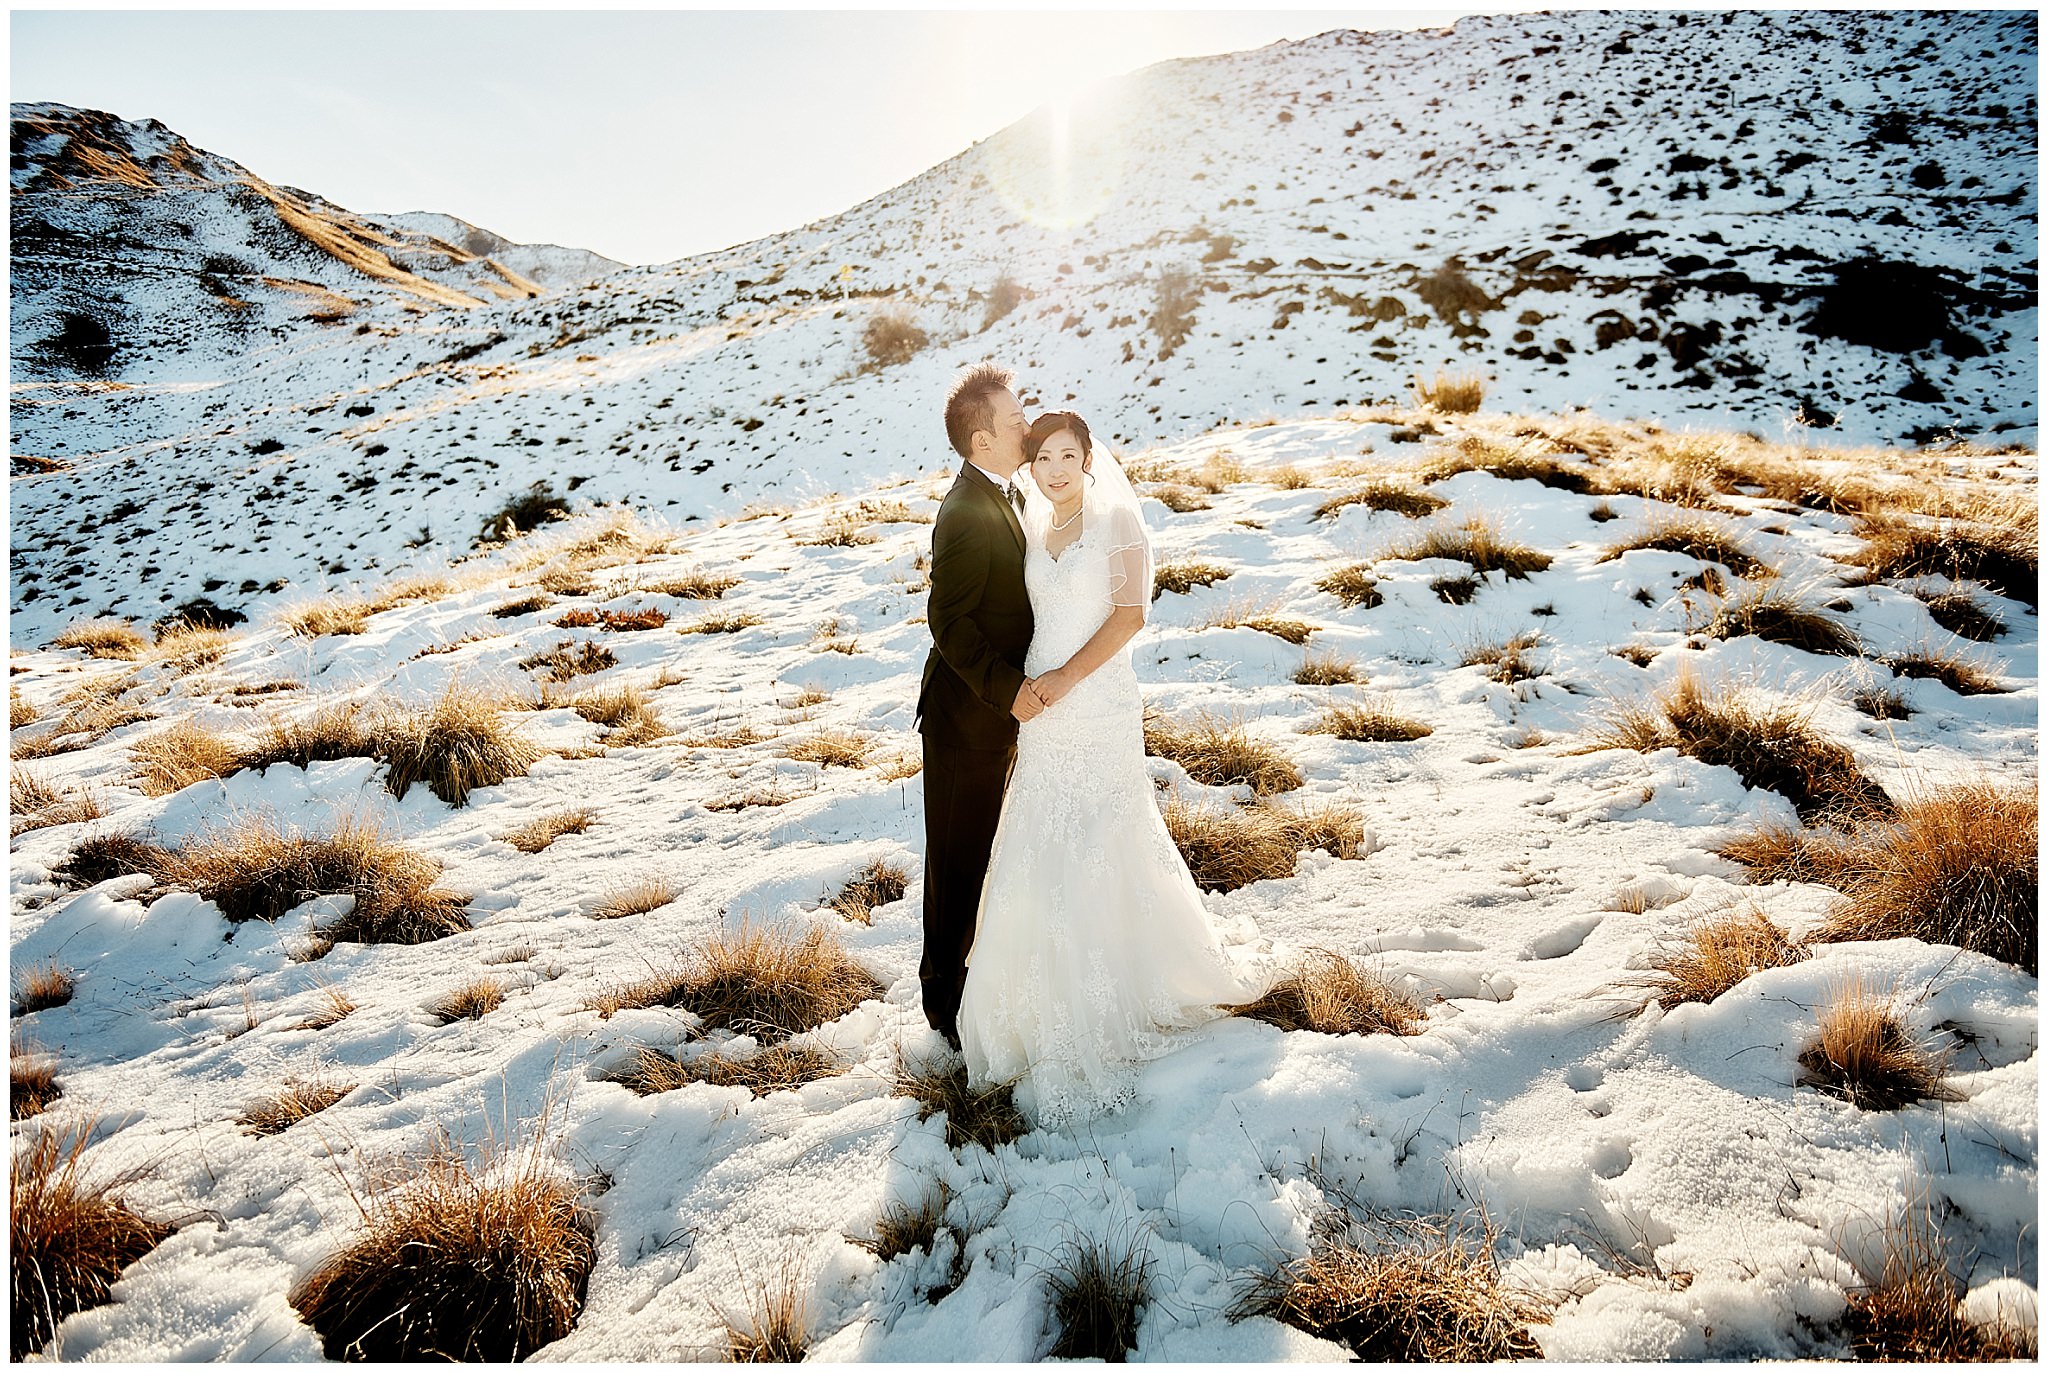 Yoshihiro and Michiko's post-wedding photoshoot in a snow-covered field in Queenstown, NZ.